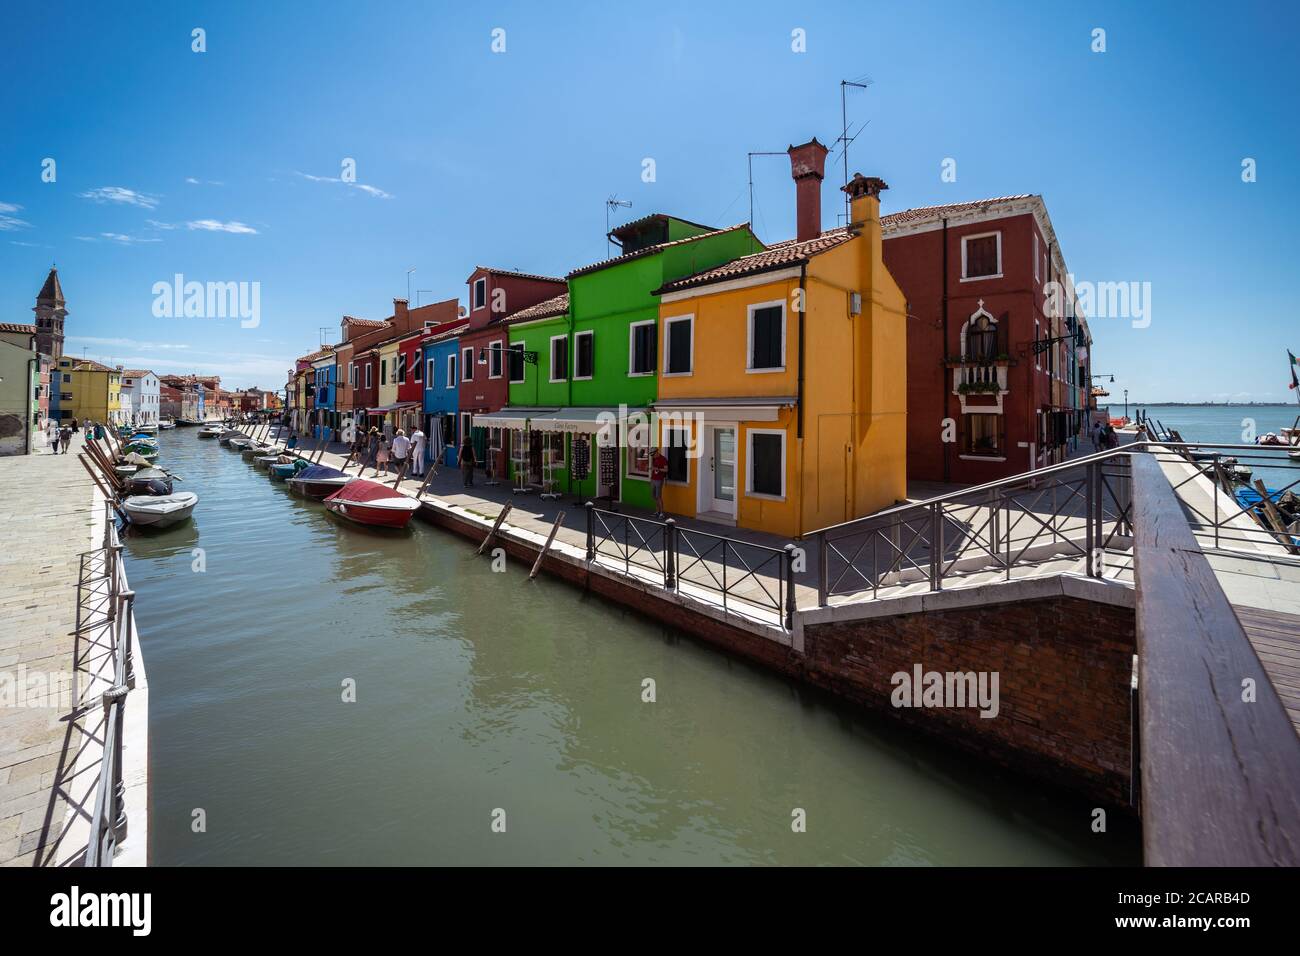 Burano island, Venetian Lagoon, Venice, Italy, panorama with the typical coloured homes frontages overlooking a canal crossing in the town centre Stock Photo